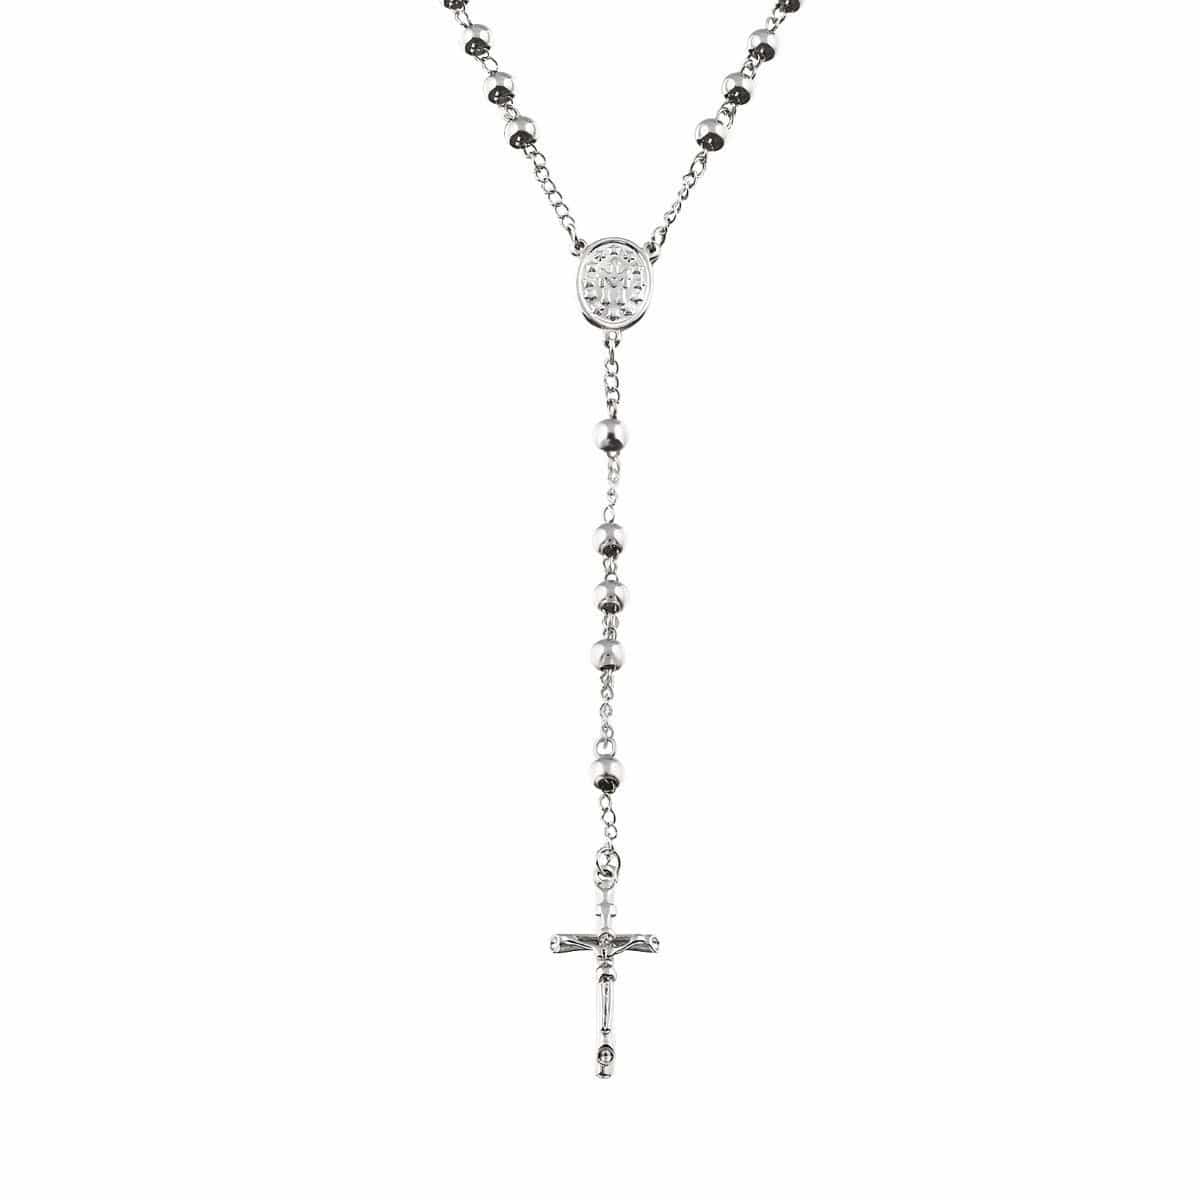 Rosary Beads Necklace